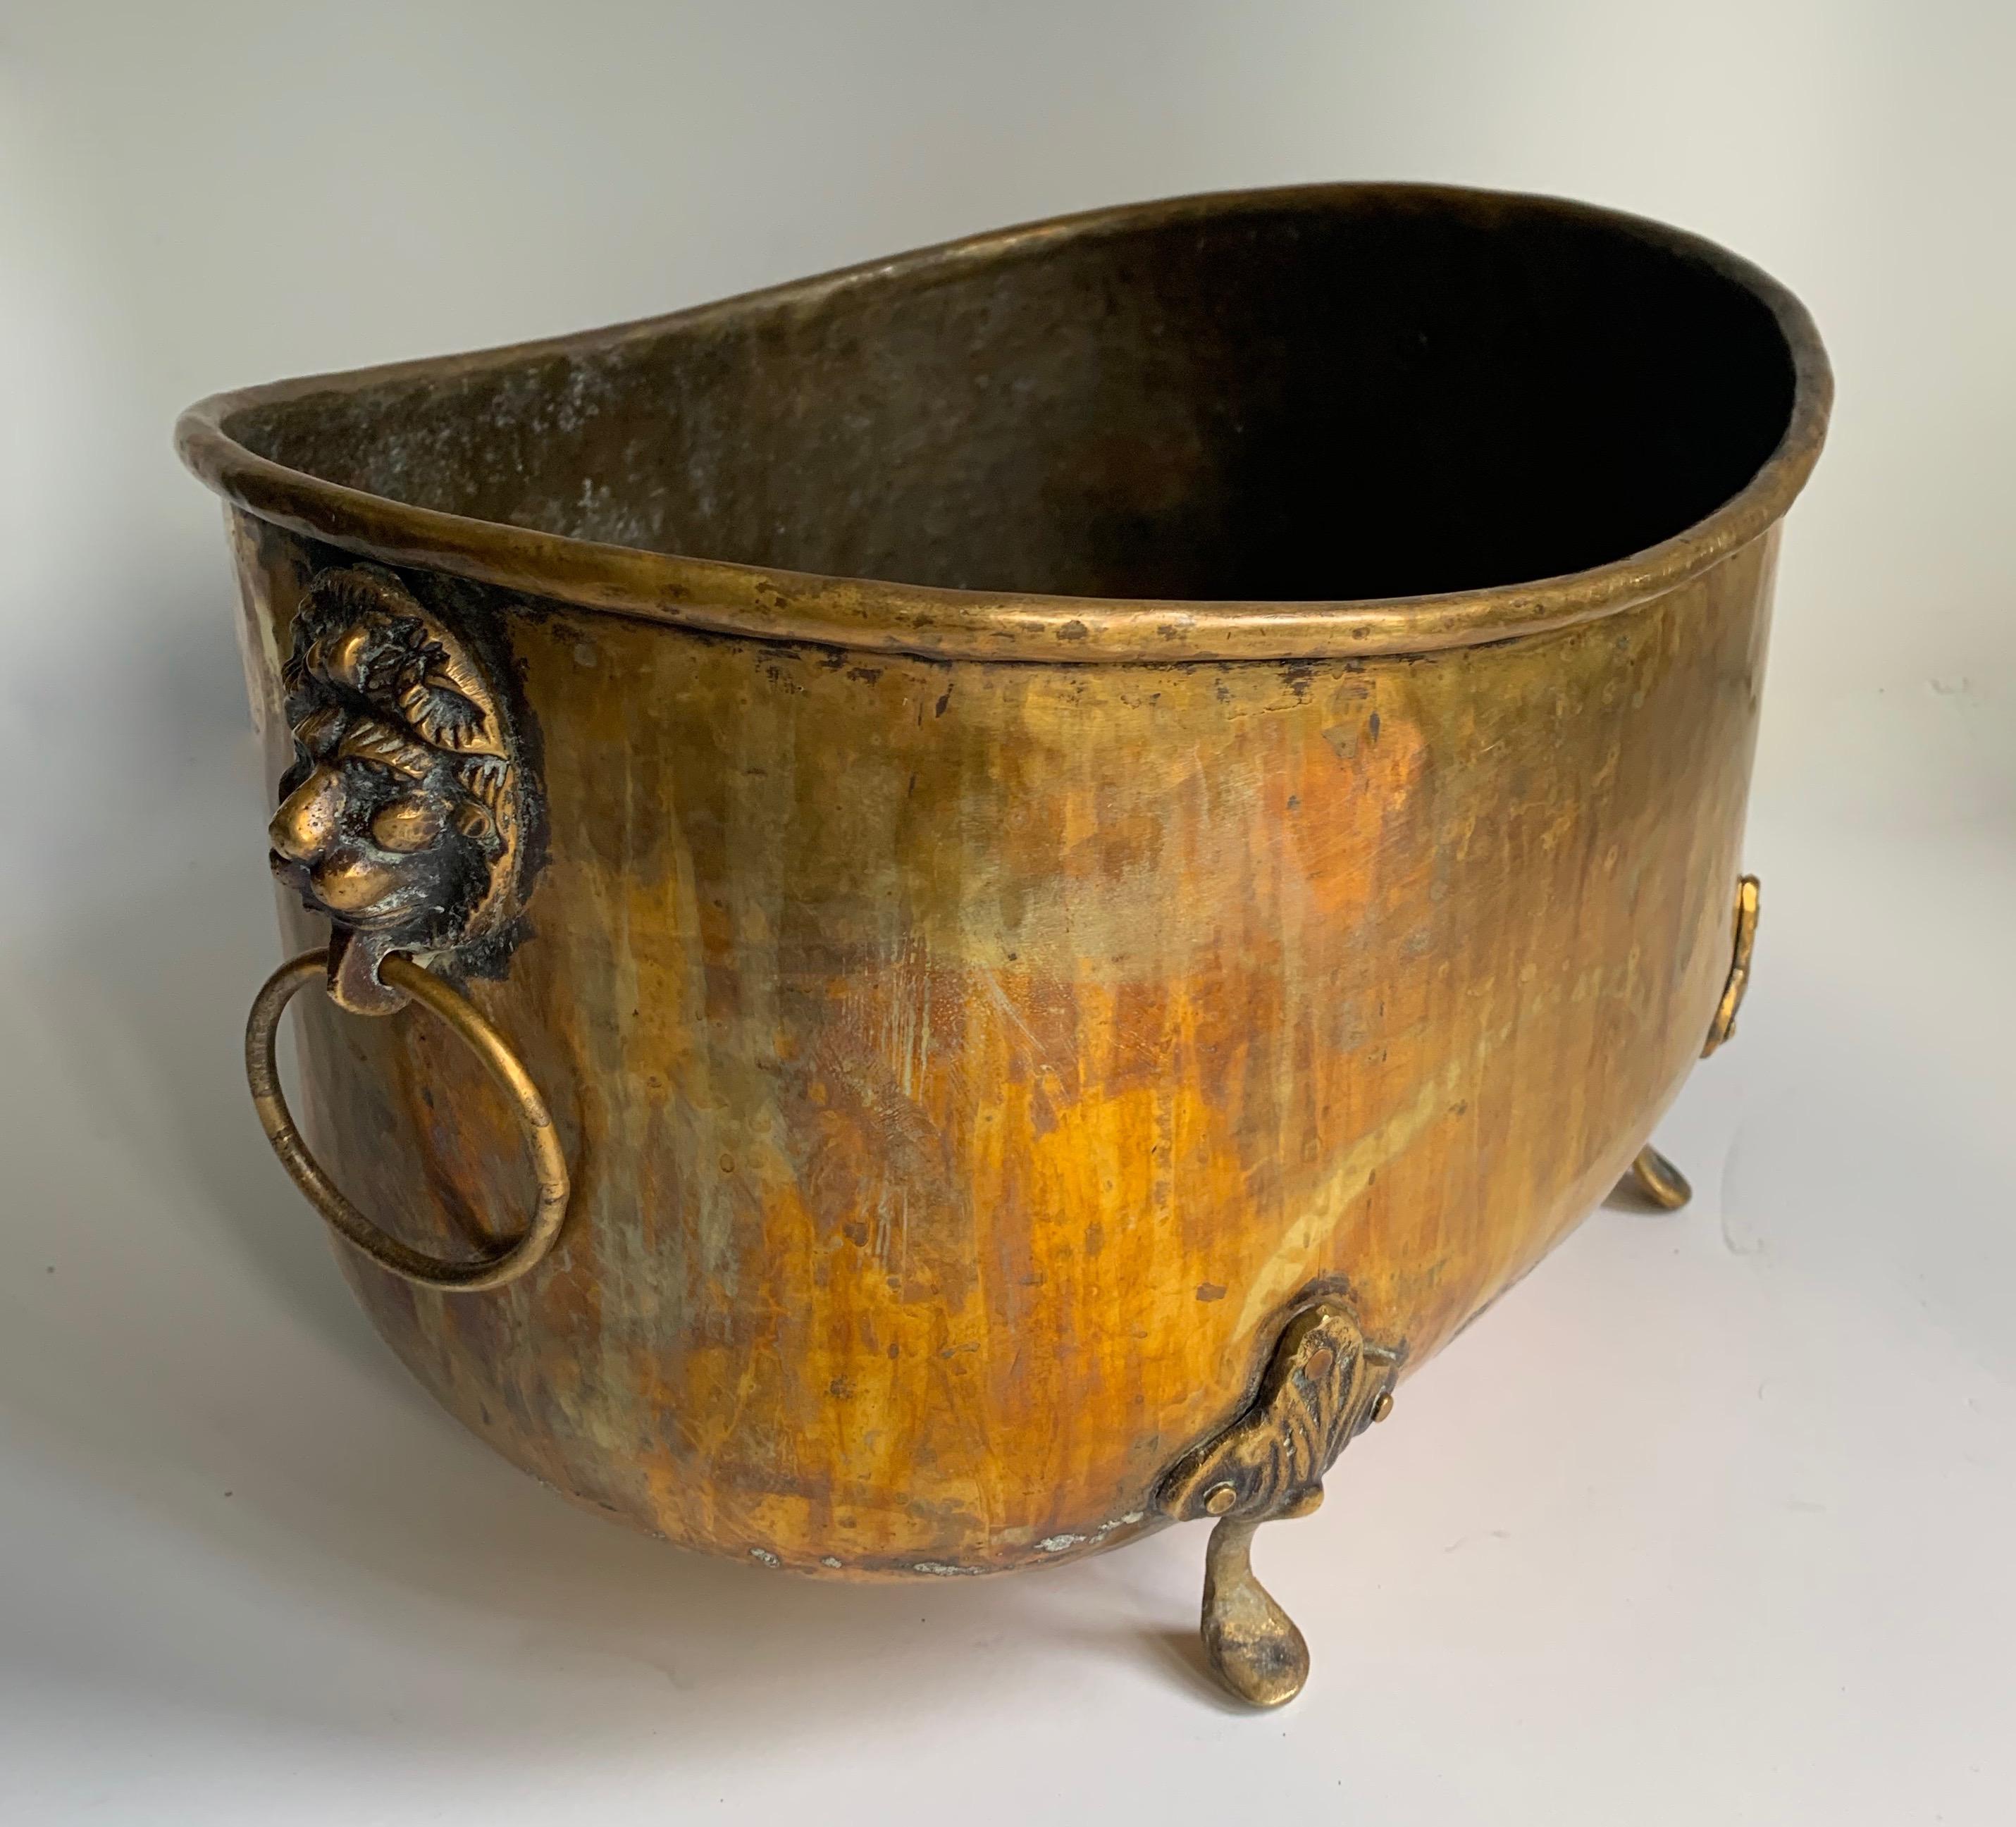 19th century brass jardinière planter with lion handles - The patina is exquisite! A wonderful compliment to any table or desk. Useful as a decorative planter / jardinière, or for magazines and mail.